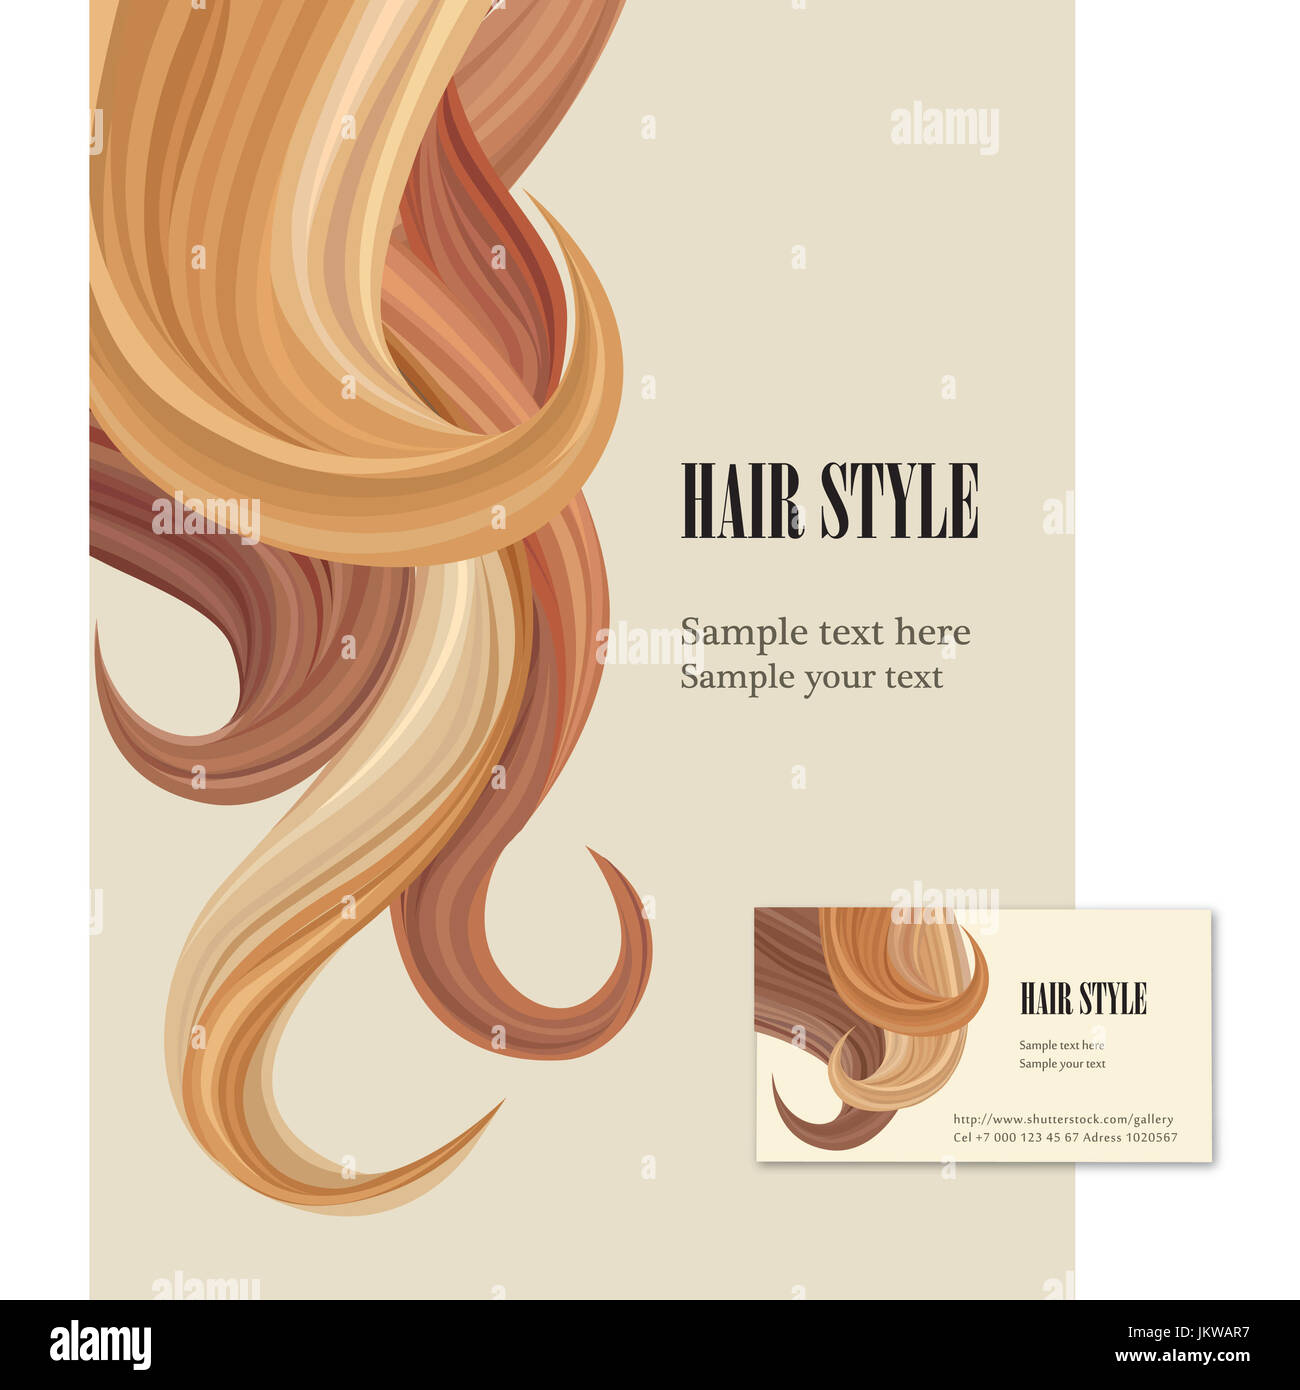 Hair style background. Set poster and visit card for beauty salon Stock  Photo - Alamy